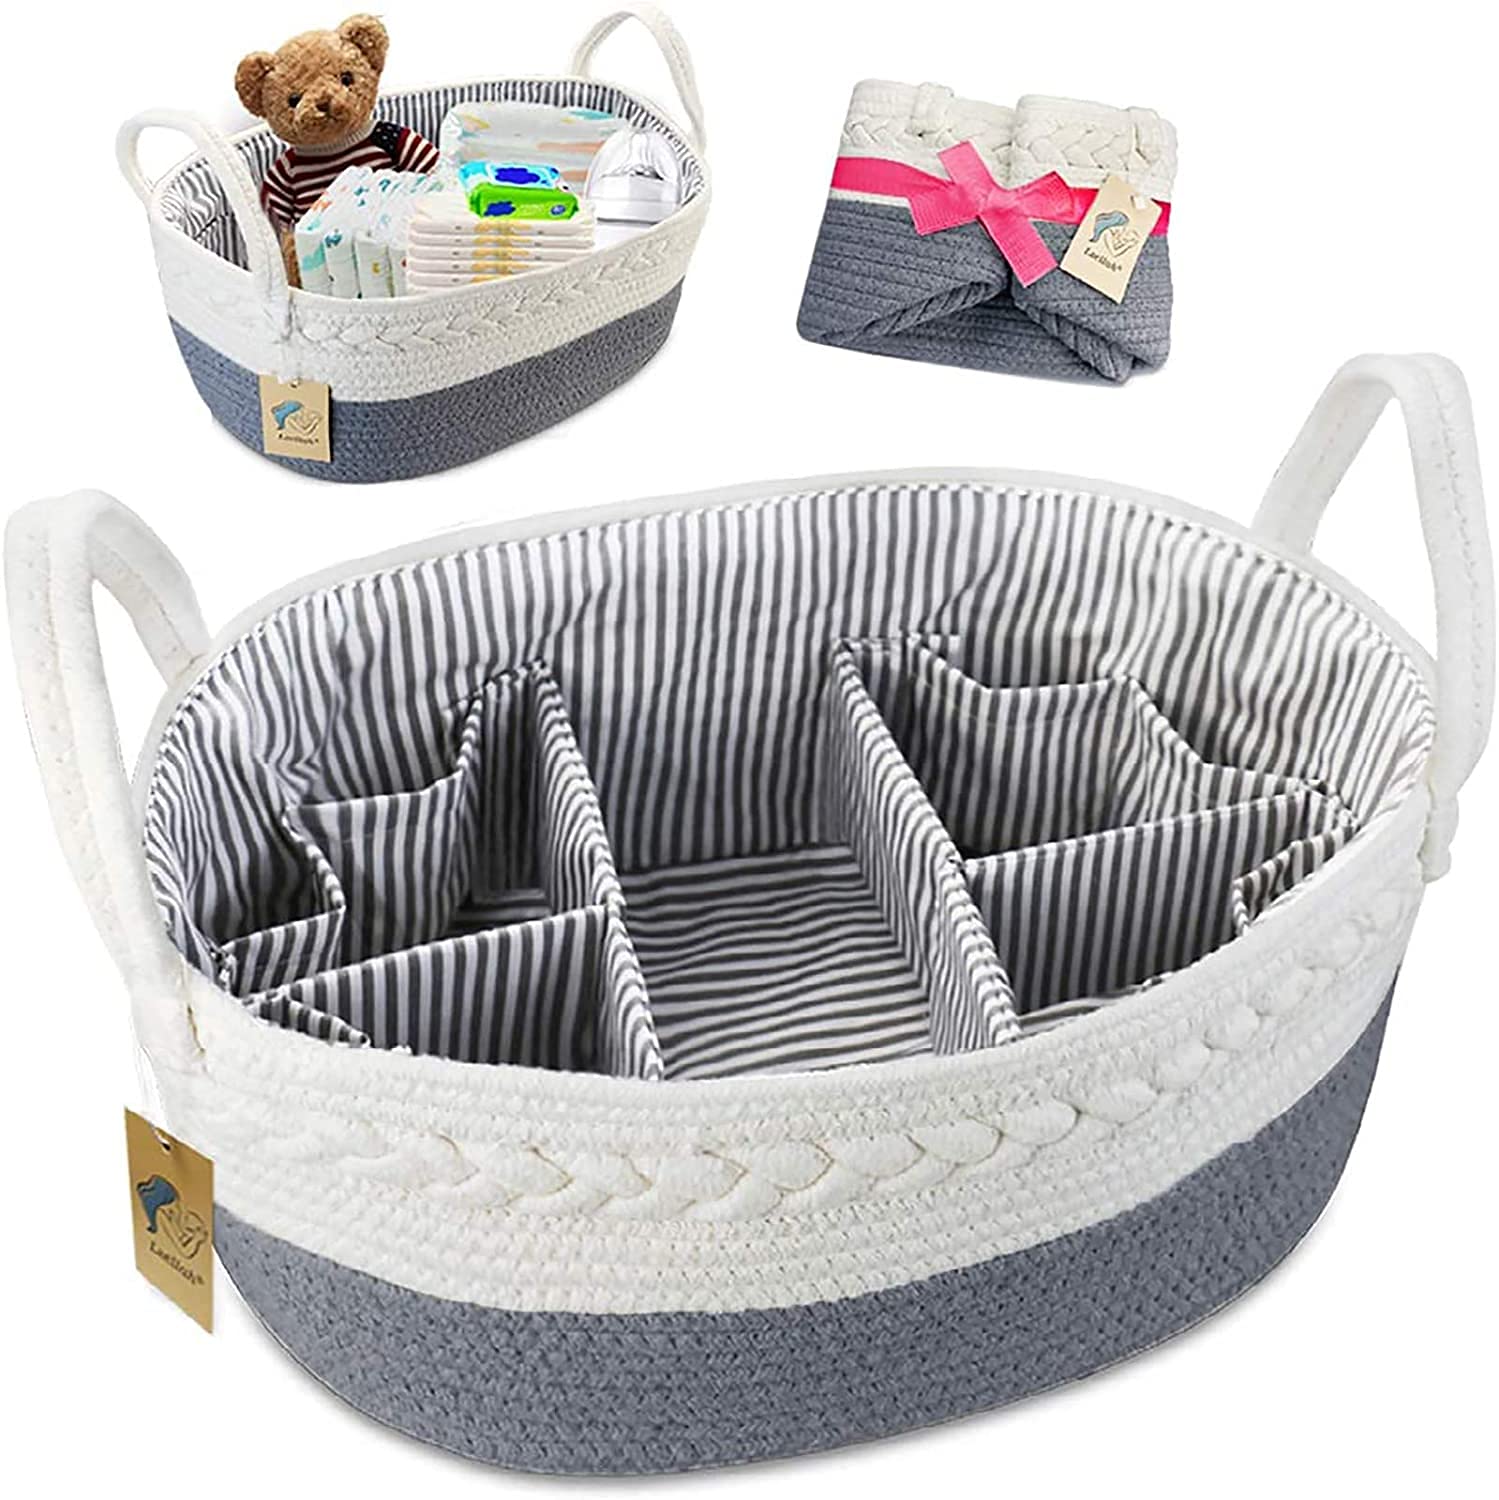 Baby Nappy Caddy Organiser,Baby Storage Basket with Changeable Compartments,Large 100% Cotton Rope Woven Multifunctional Nappy Diaper Caddy Nursery Bin, Portable Baby Toiletries Box Hampers for Mom